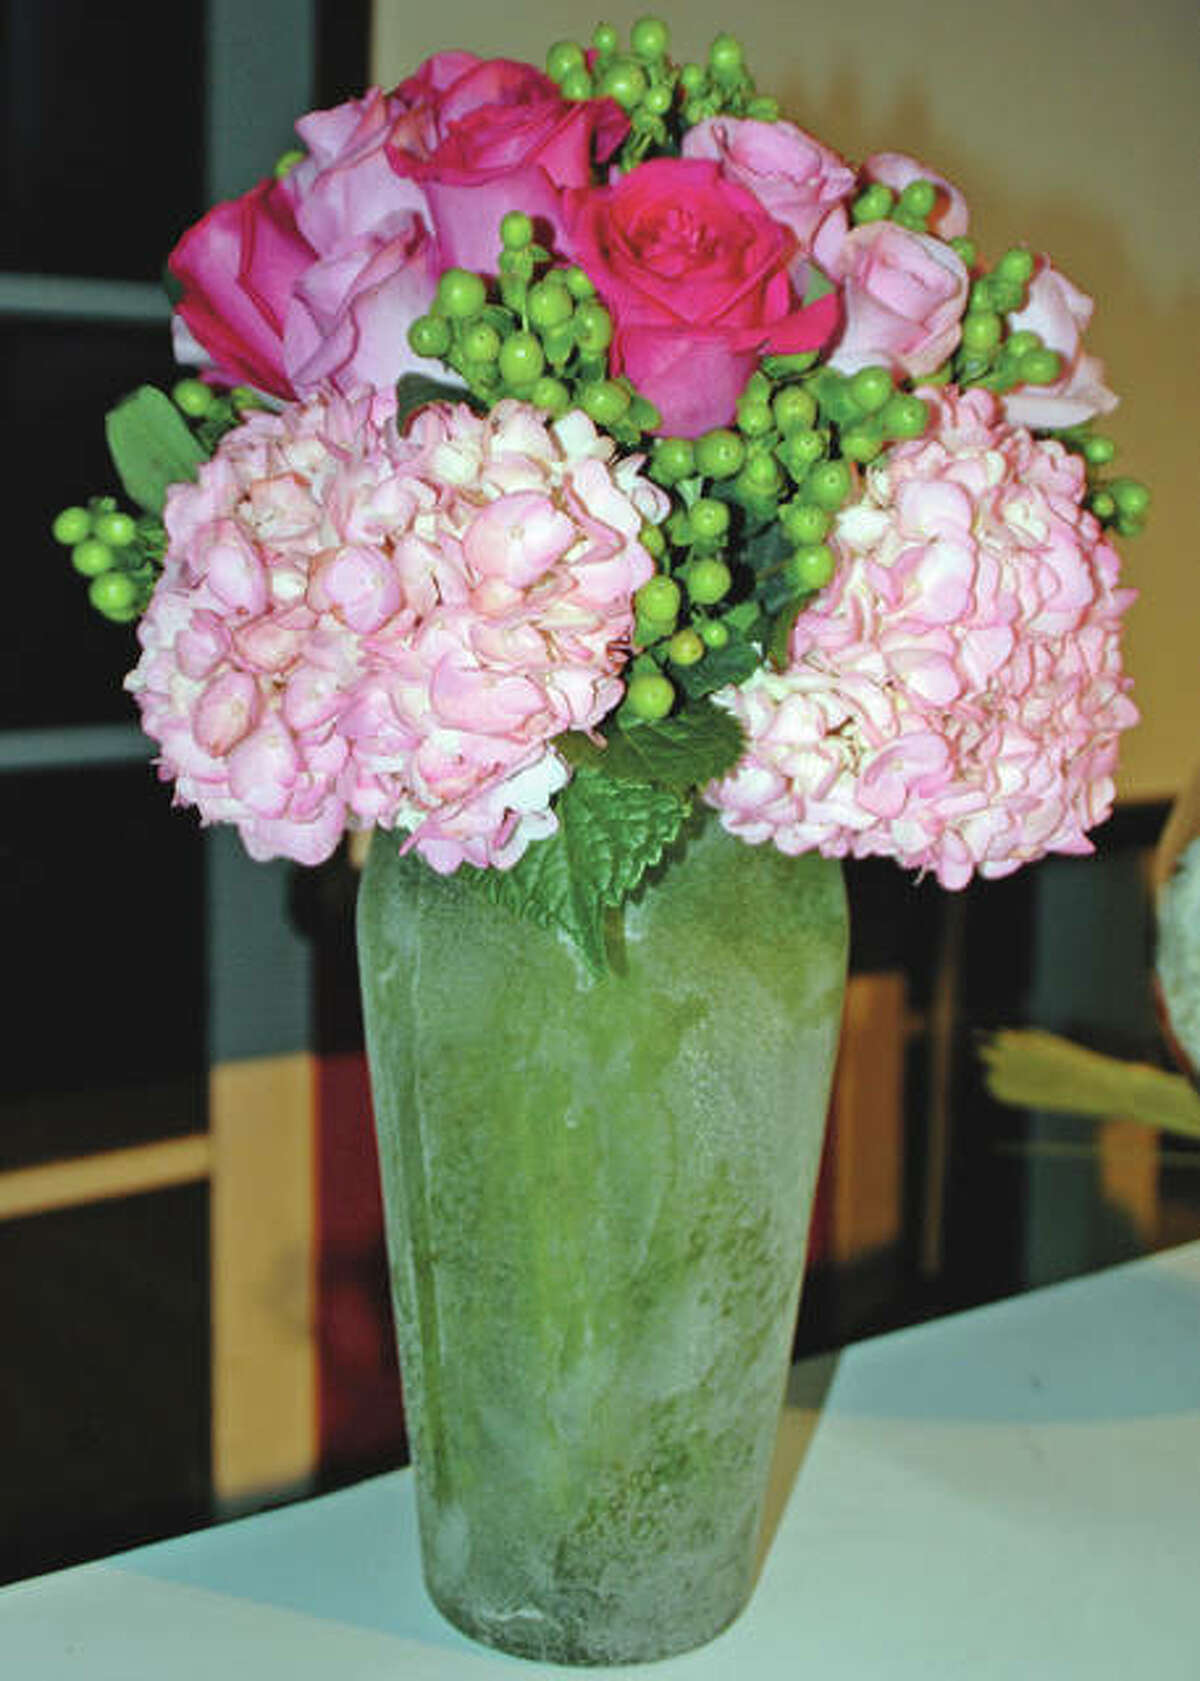 The life of a floral bouquet can be extended with proper selection and care.